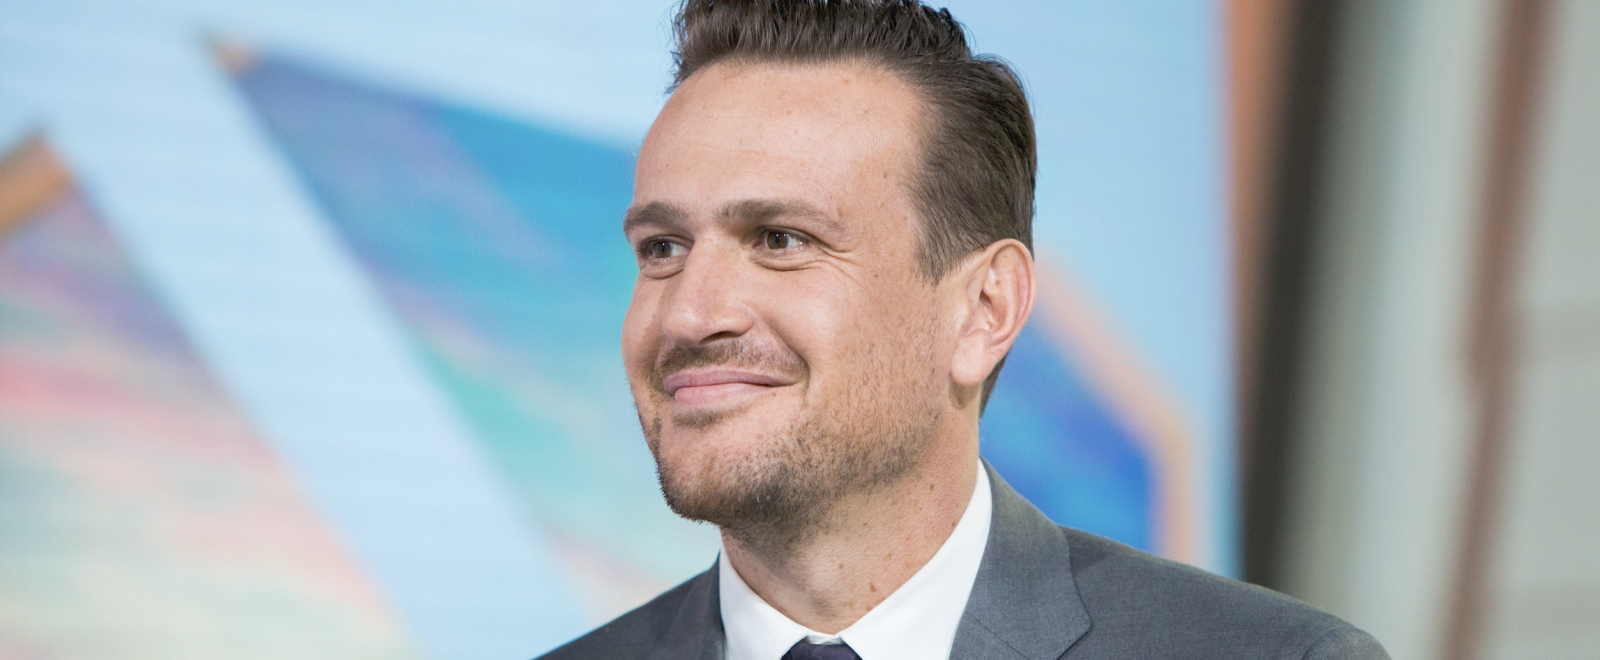 ‘How I Met Your Mother’ Star Jason Segel Has Explained Why He Hasn’t Starred In A Comedy In Years